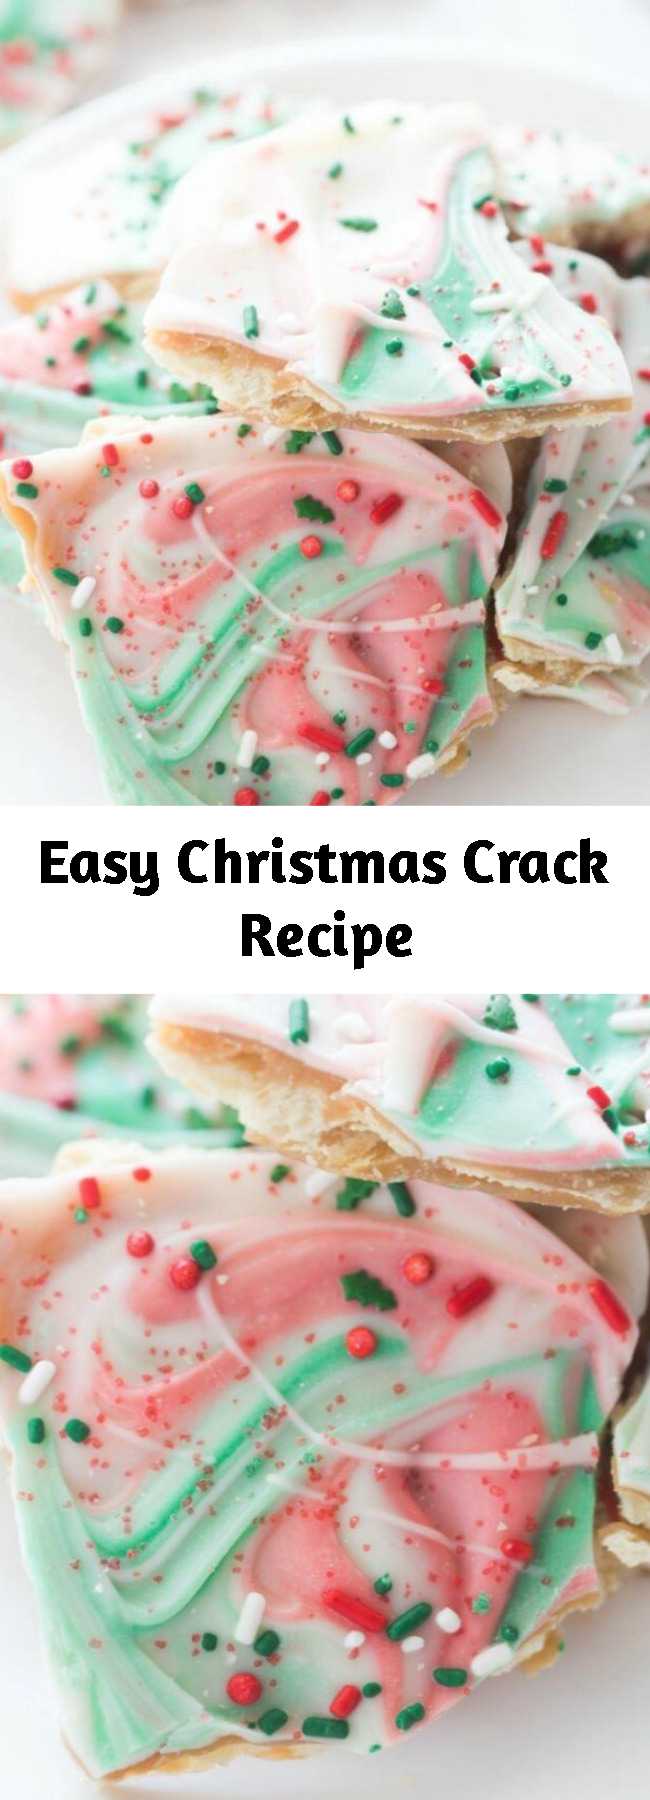 Easy Christmas Crack Recipe - Don't miss this Easy Christmas Crack Recipe for one of the best holiday party treats and gift recipes for your friends, neighbors, and co-workers! This is so easy to make and always a crowd favorite! #christmas #treats #desserts #gift #ideas #snacks #white #chocolate